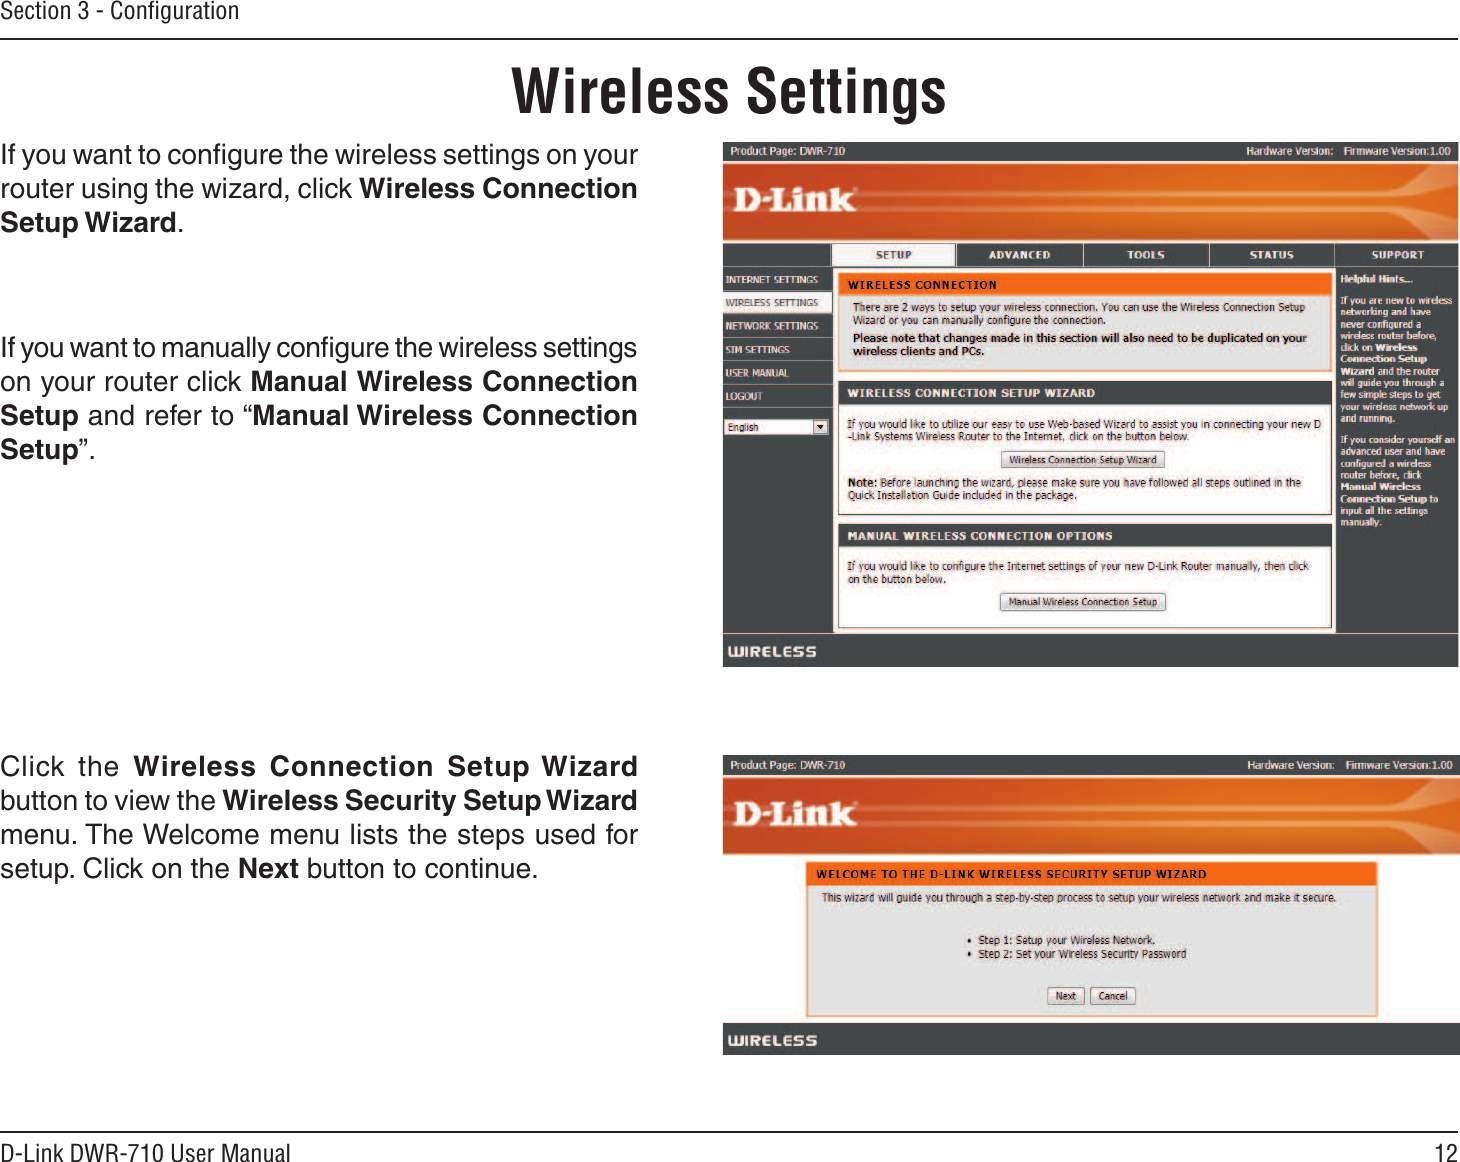 12D-Link DWR-710 User ManualSection 3 - ConﬁgurationWireless SettingsIf you want to conﬁgure the wireless settings on your router using the wizard, click Wireless Connection Setup Wizard.If you want to manually conﬁgure the wireless settings on your router click Manual Wireless Connection Setup and refer to “Manual Wireless Connection Setup”.Click  the  Wireless  Connection  Setup Wizard  button to view the Wireless Security Setup Wizard menu. The Welcome menu lists the steps used for setup. Click on the Next button to continue.